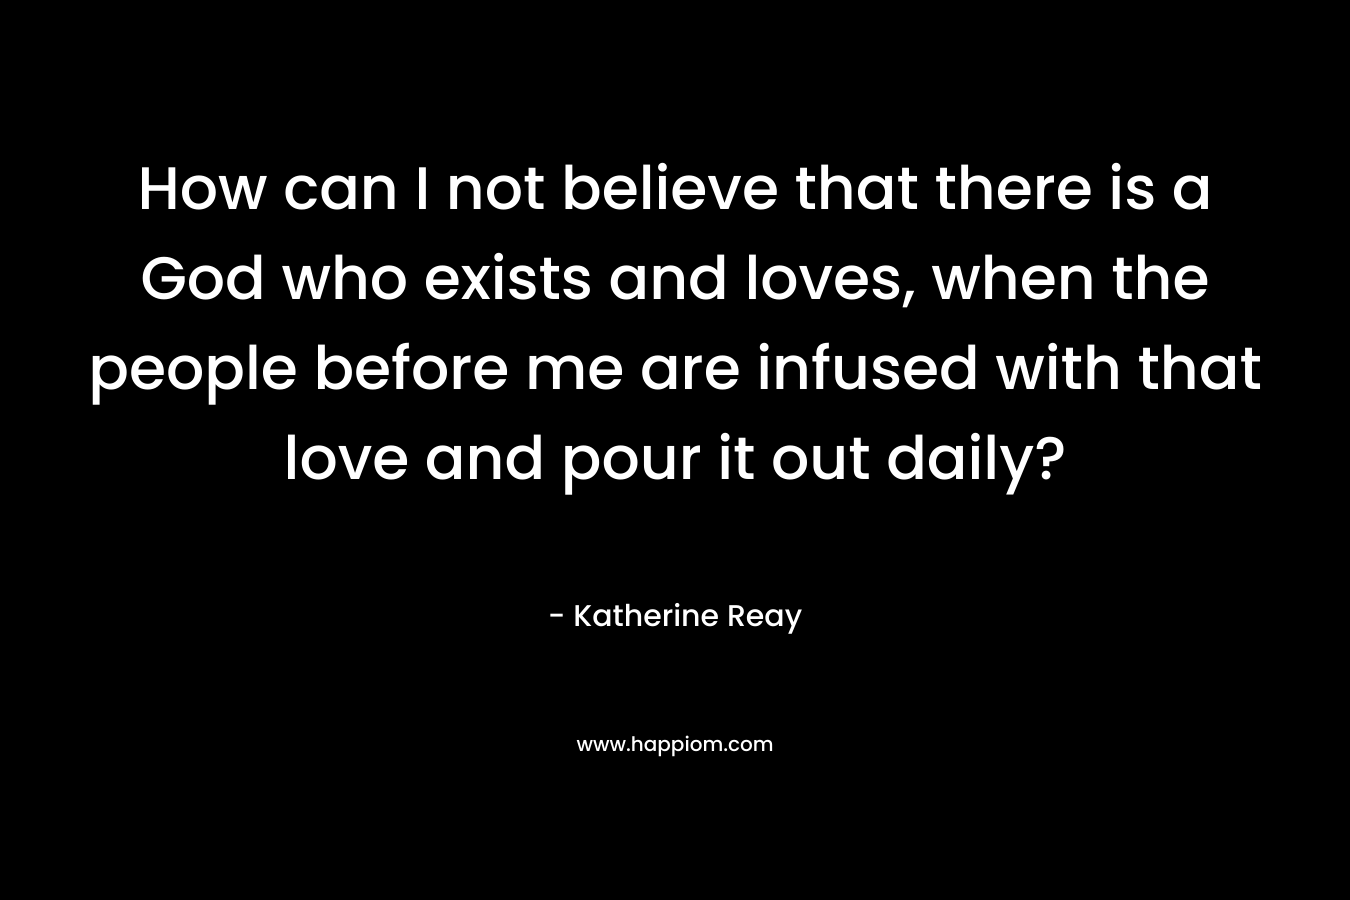 How can I not believe that there is a God who exists and loves, when the people before me are infused with that love and pour it out daily? – Katherine Reay